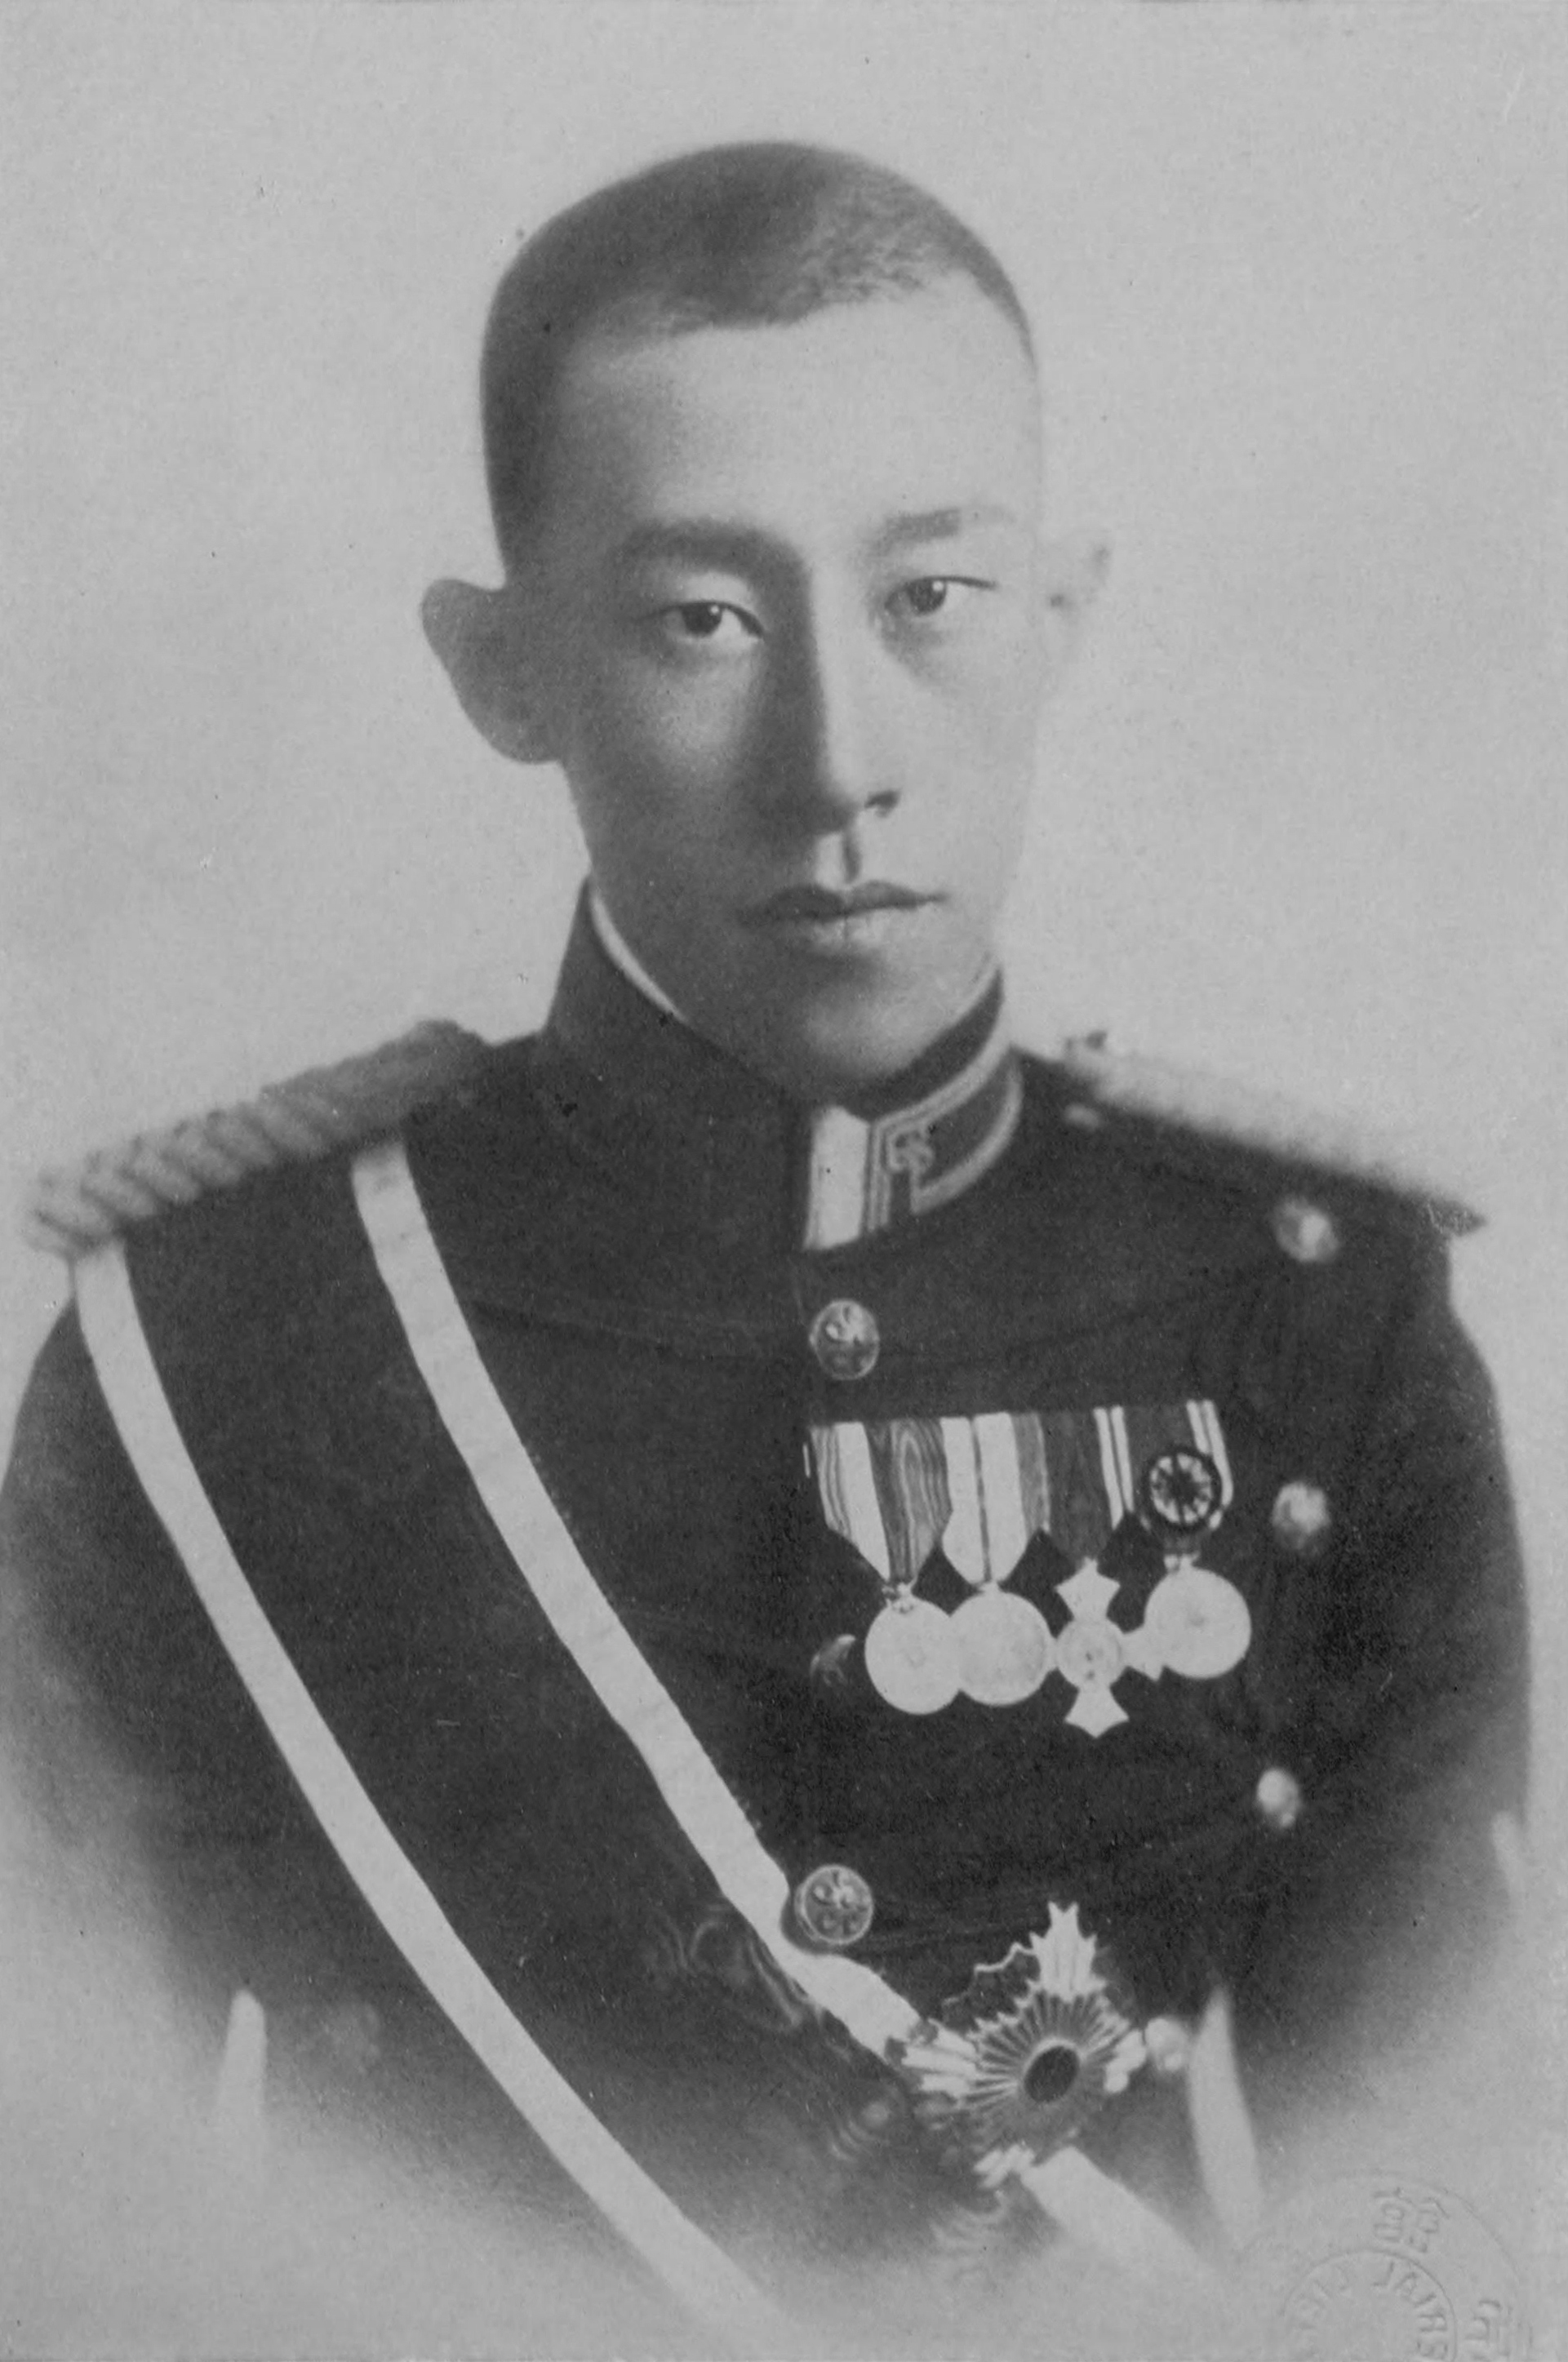 Portrait of Prince Yi Geon of Korea, a captain in the Japanese Army, 1937